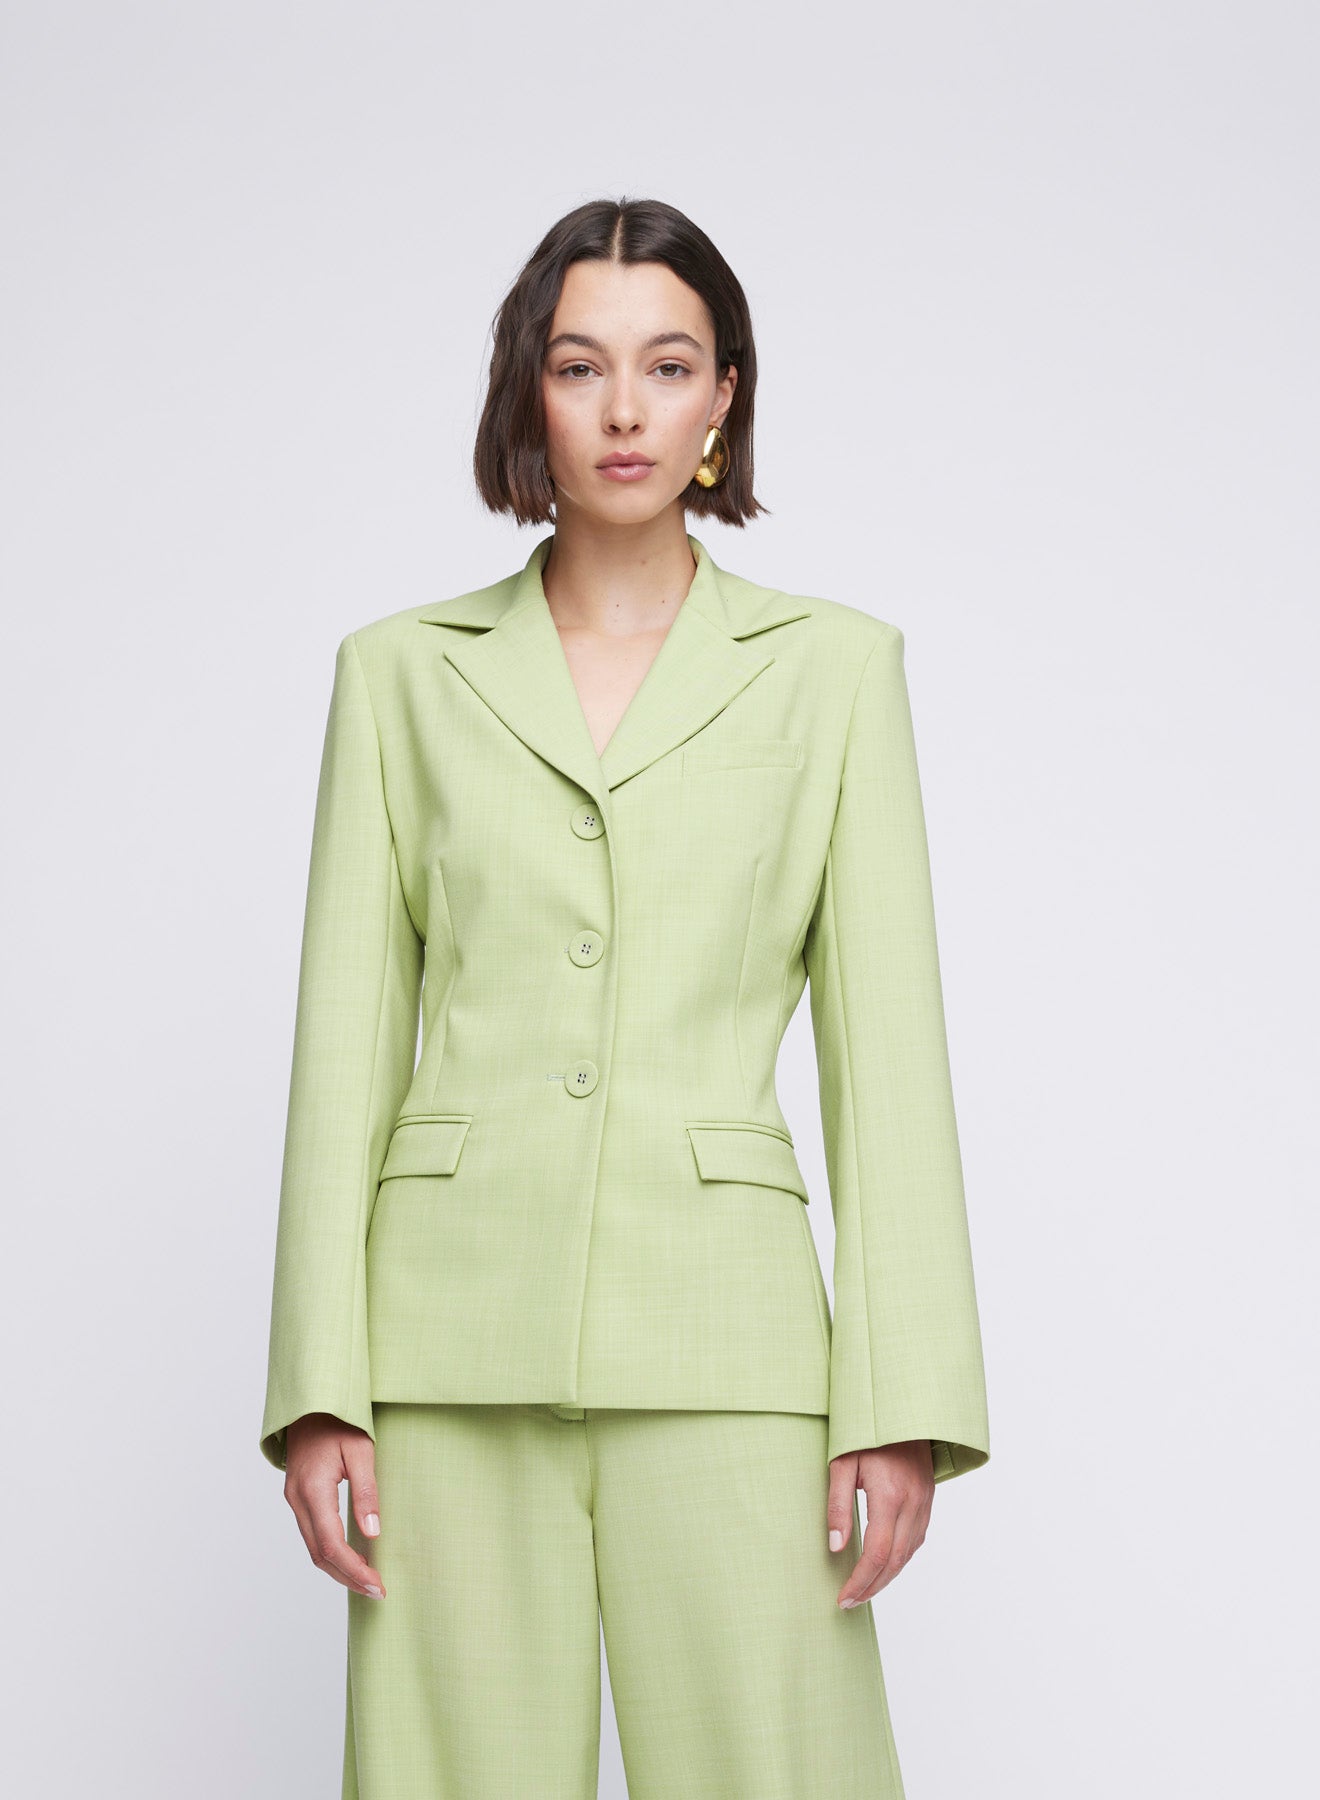 ANNA QUAN Serena Blazer in lightweight wool. Fitted silhouette, single-breasted, two functional pockets. Ideal for a polished tailored look. Work blazer, Blazers, wool blazers, tailored work blazer, cropped blazer. 